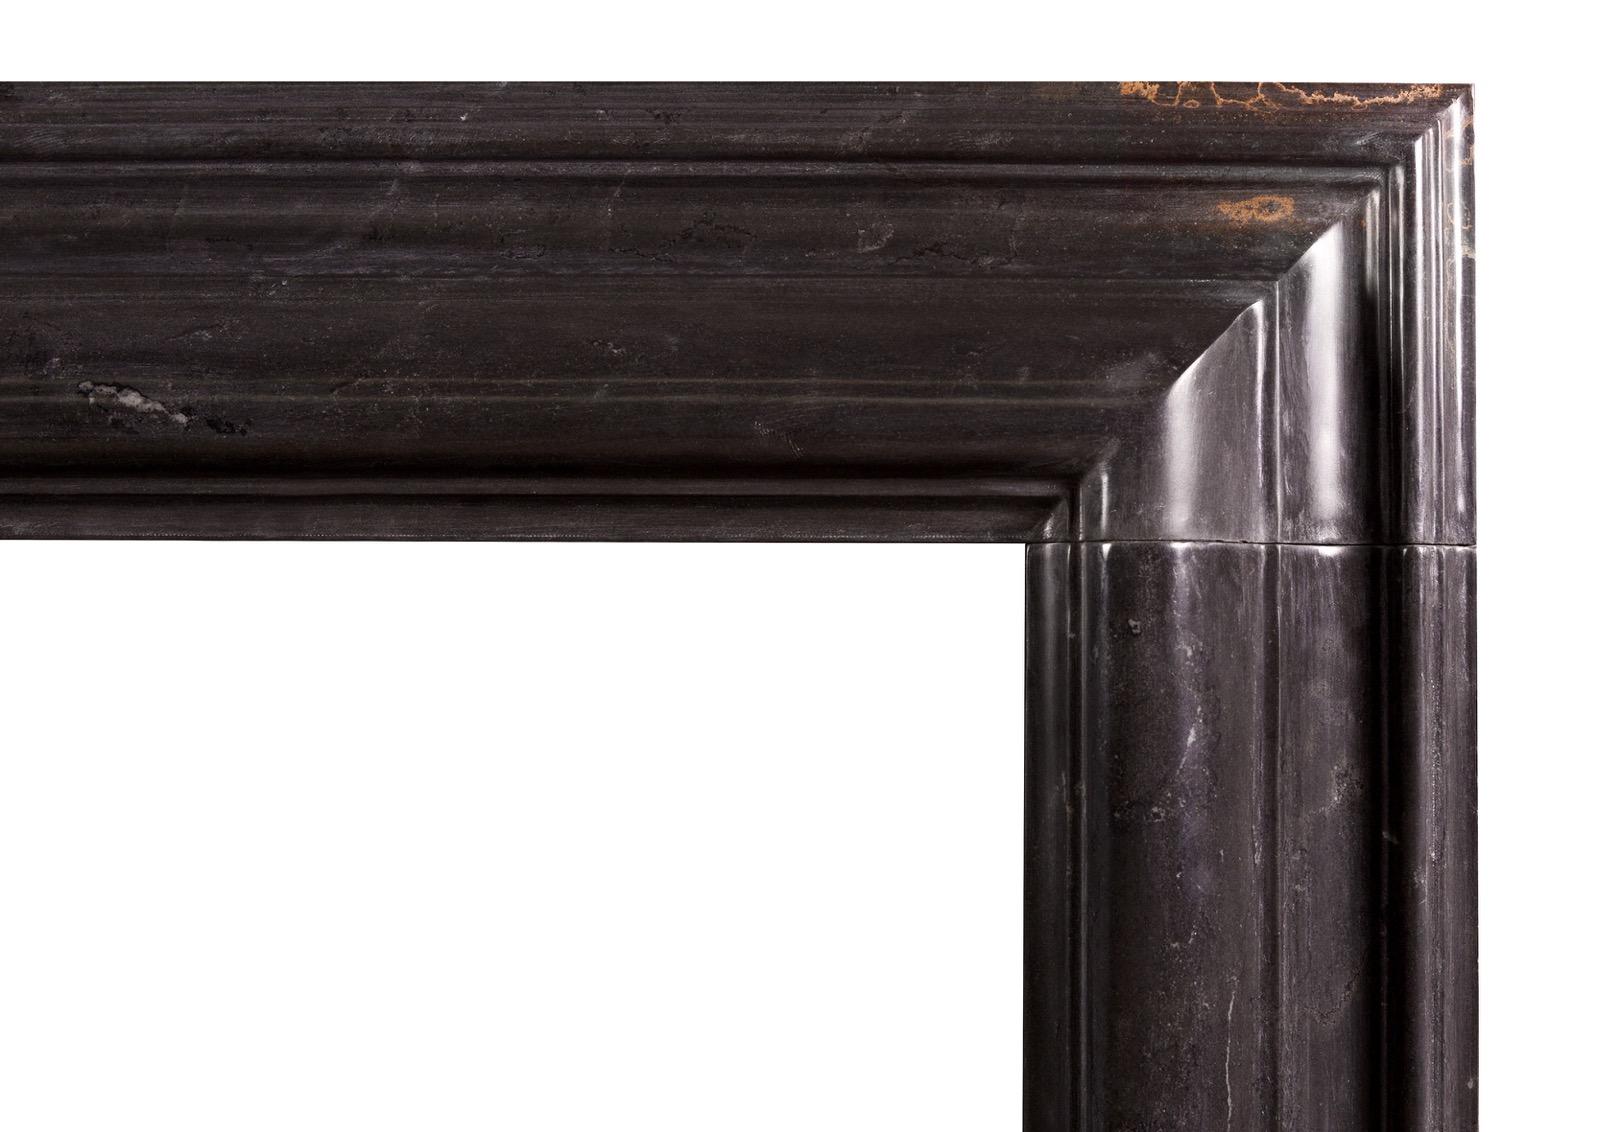 An English moulded bolection fireplace in black marble. Based on a period original. An elegant shape. Modern. Please note that whilst the marble is largely pure black in color there is a small area of golden veining to the top right hand corner of